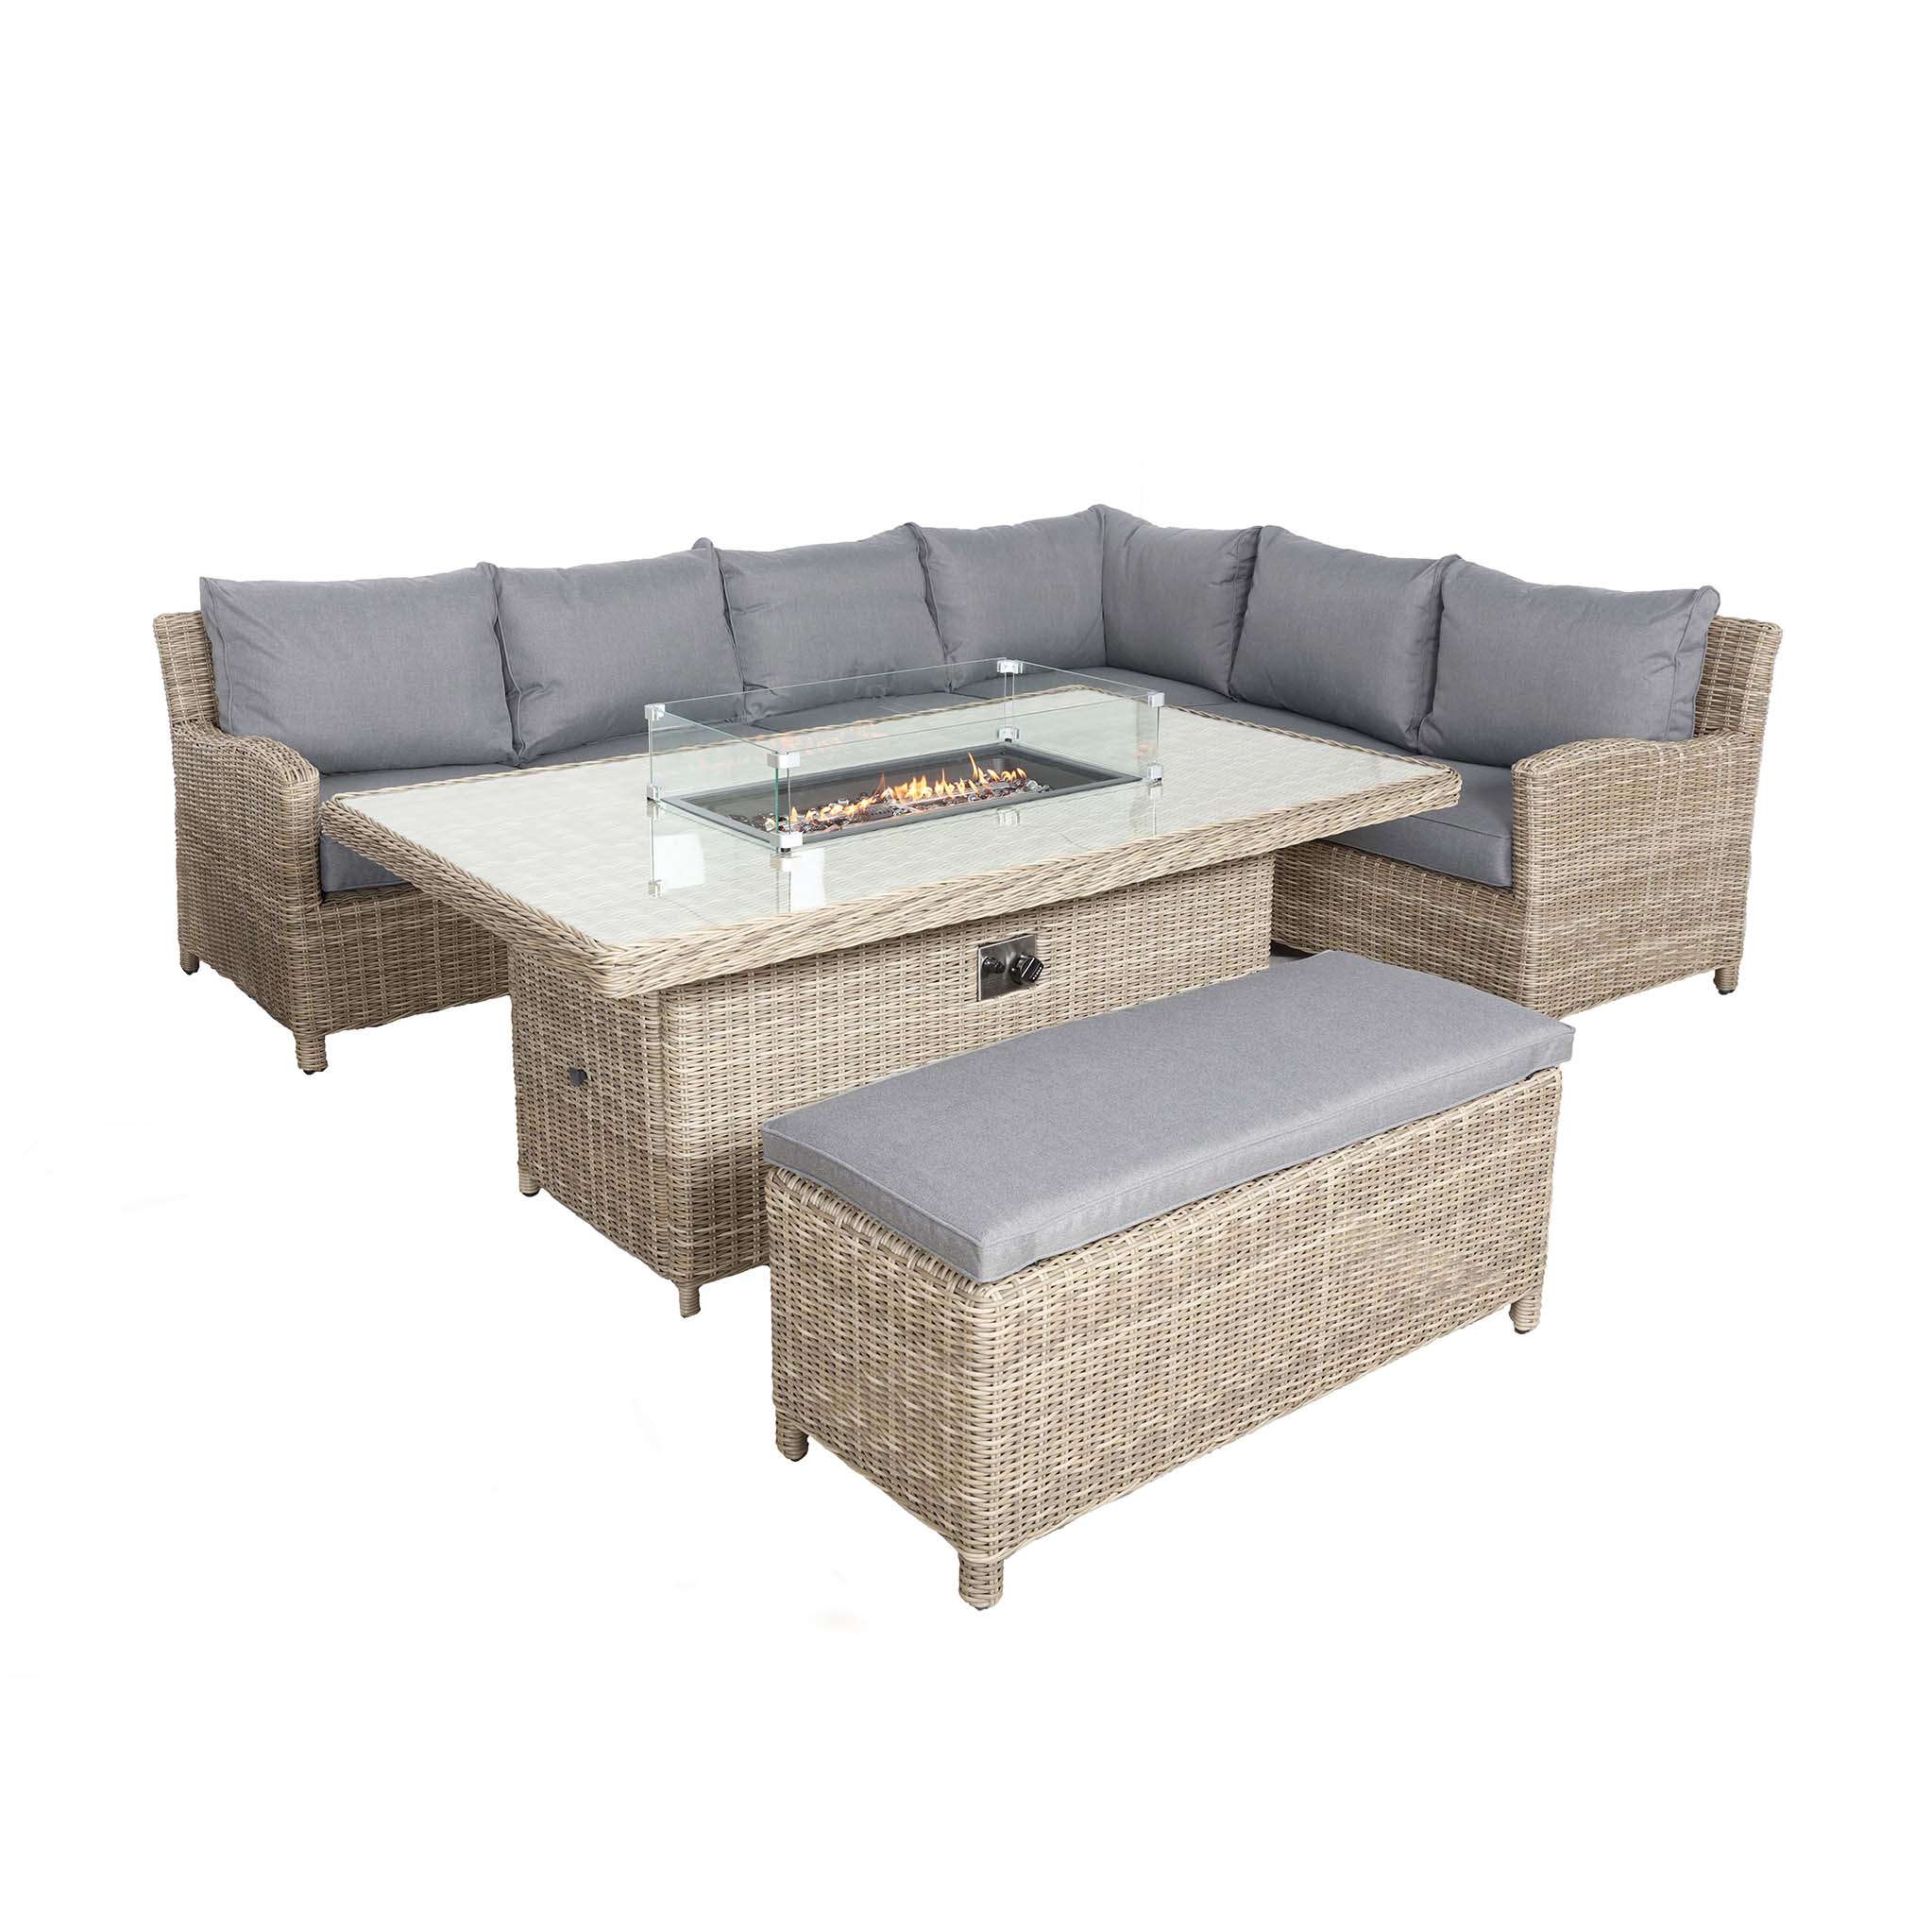 Wentworth 170cm Outdoor Fire Pit Dine Or Lounge Rattan Set With Bench